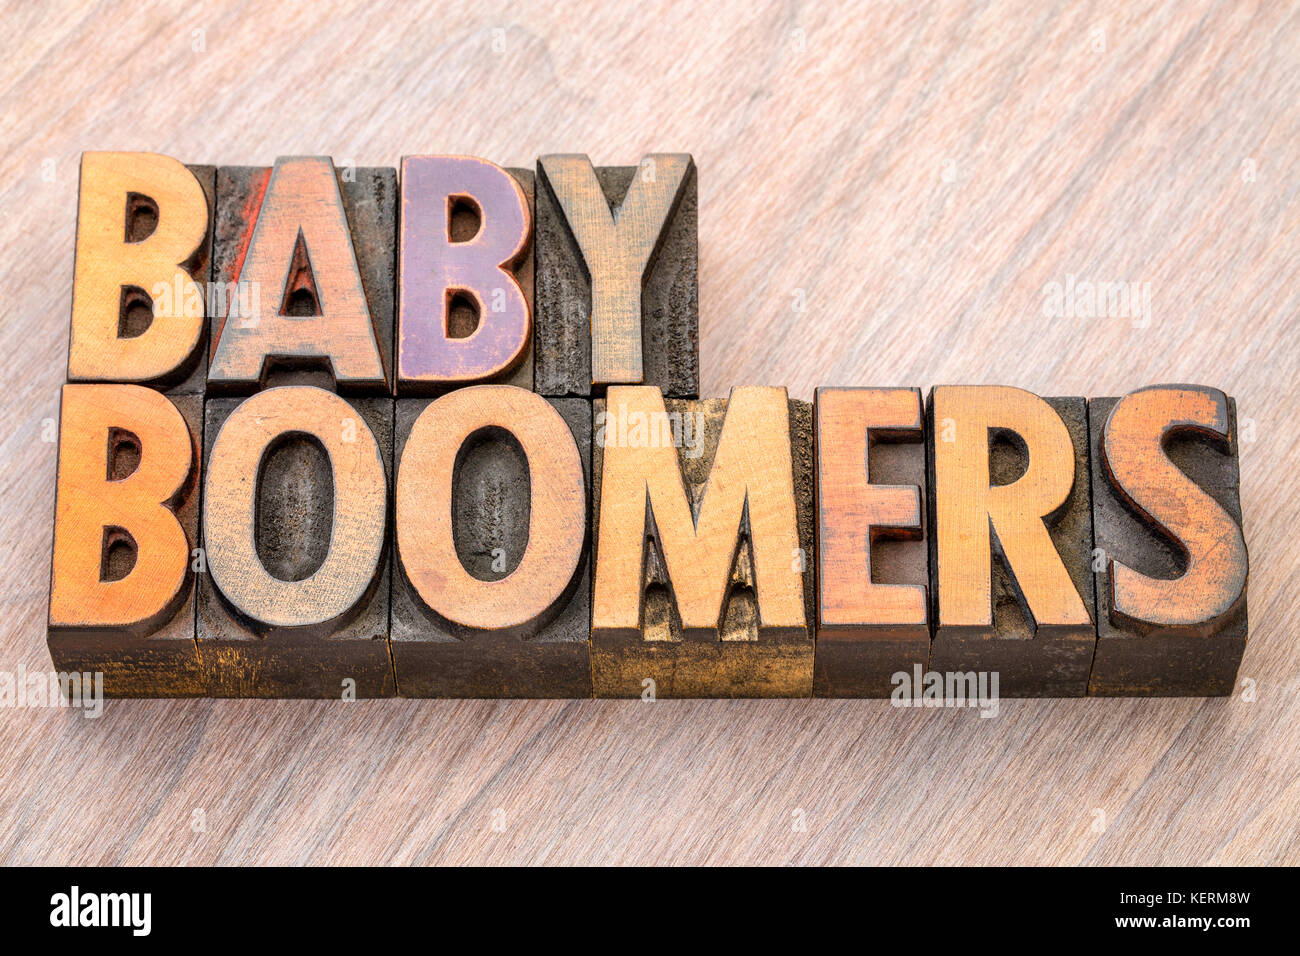 Baby boomers Wort in Vintage buchdruck Holz Art Abstract Stockfoto